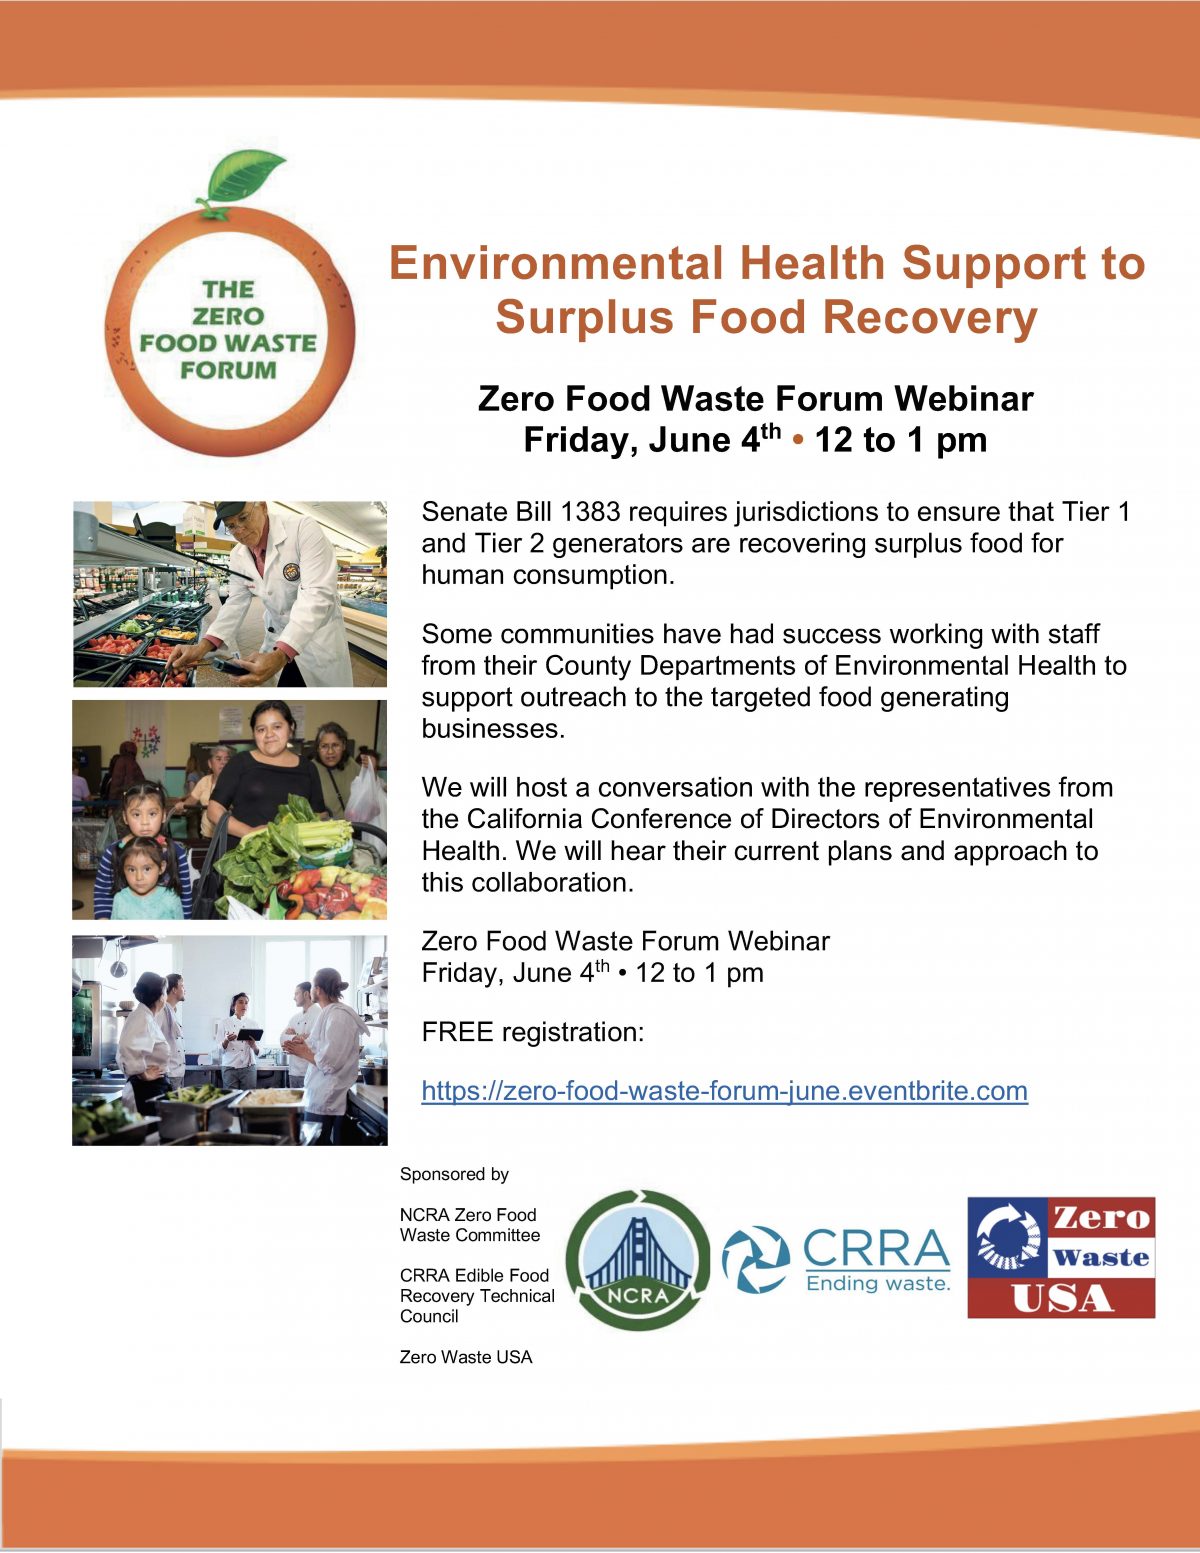 Envr Health Support to Surplus Food Recovery, 6/21